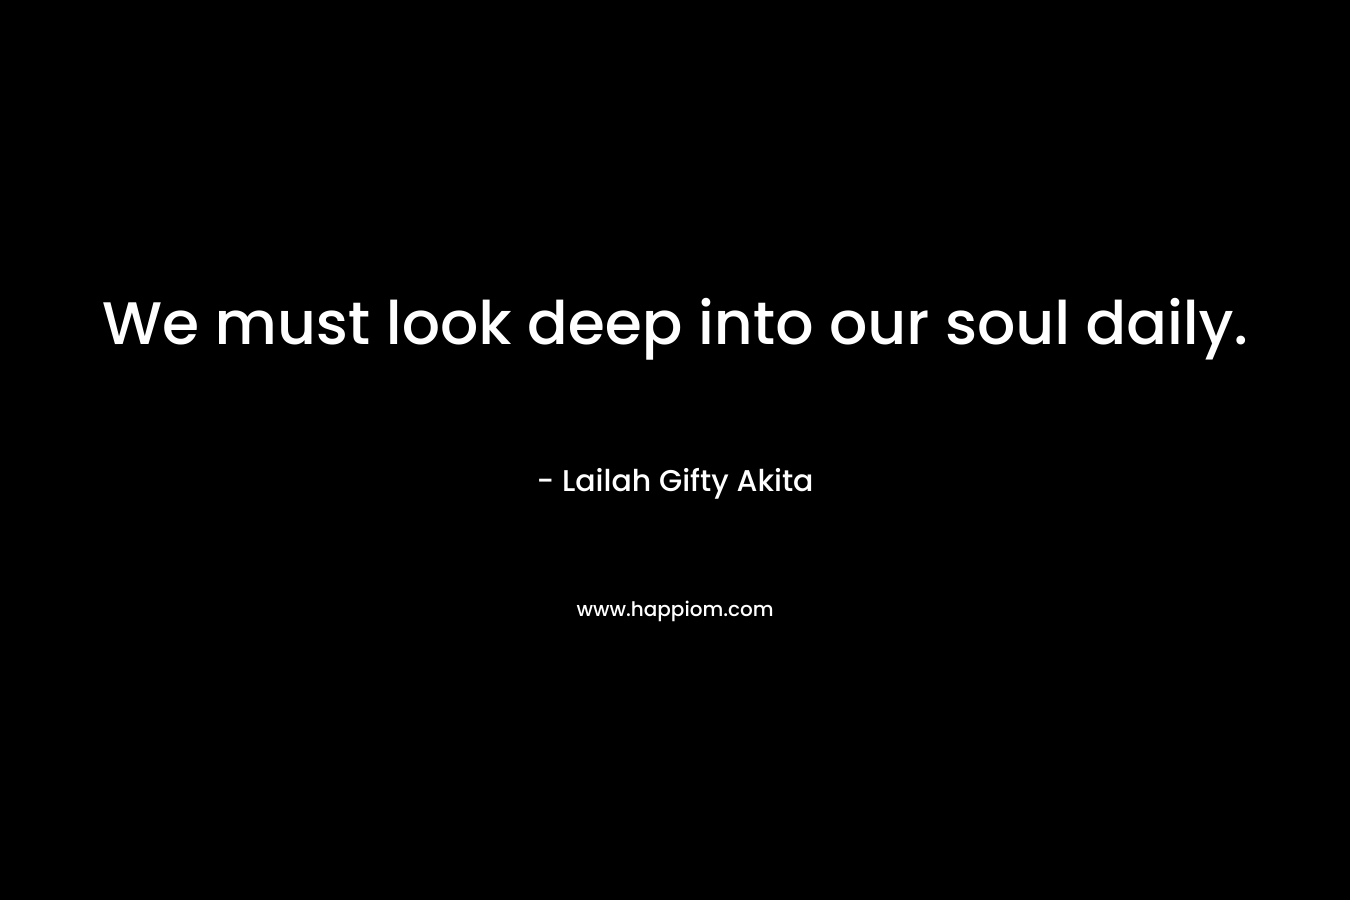 We must look deep into our soul daily.